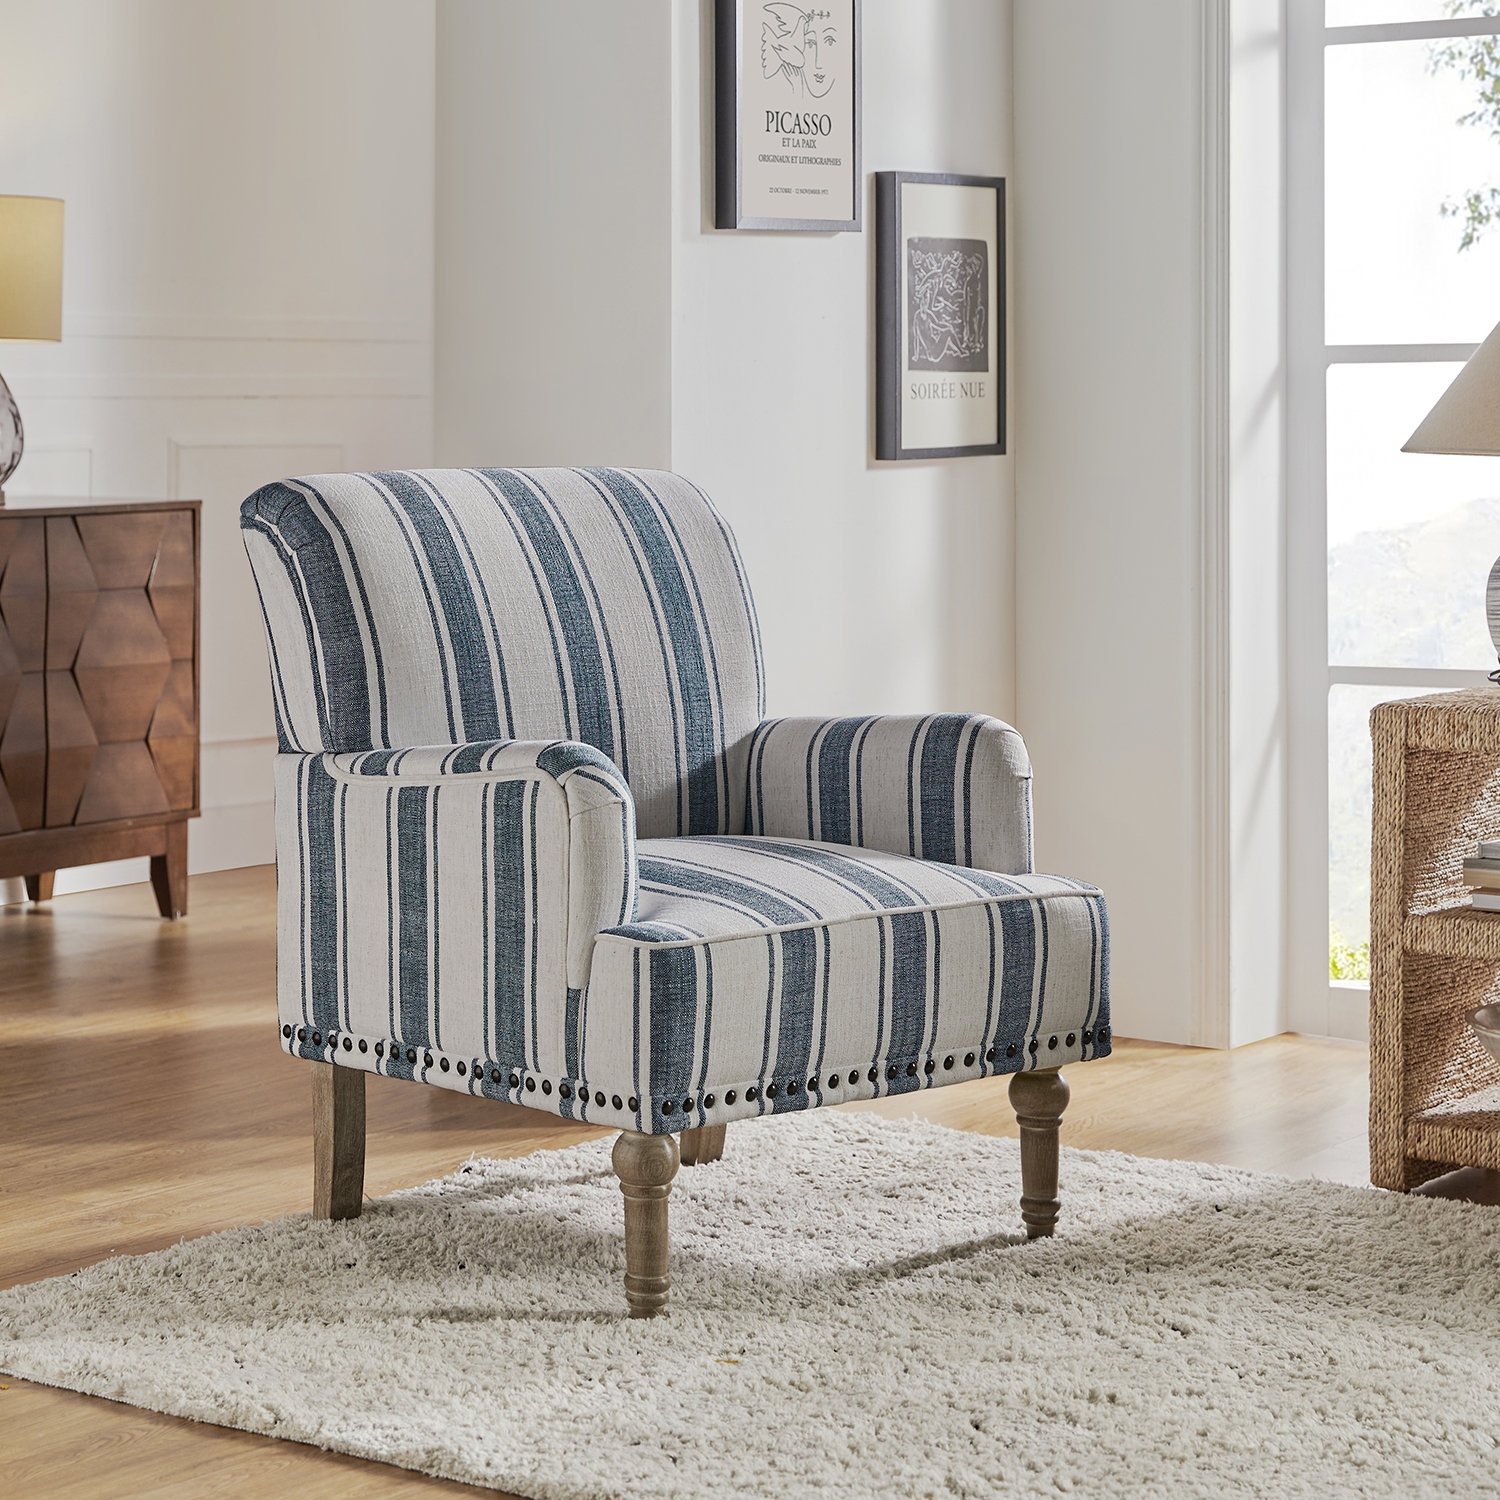 American Furniture Classics Upholstered Chair in Blue Striped Fabric